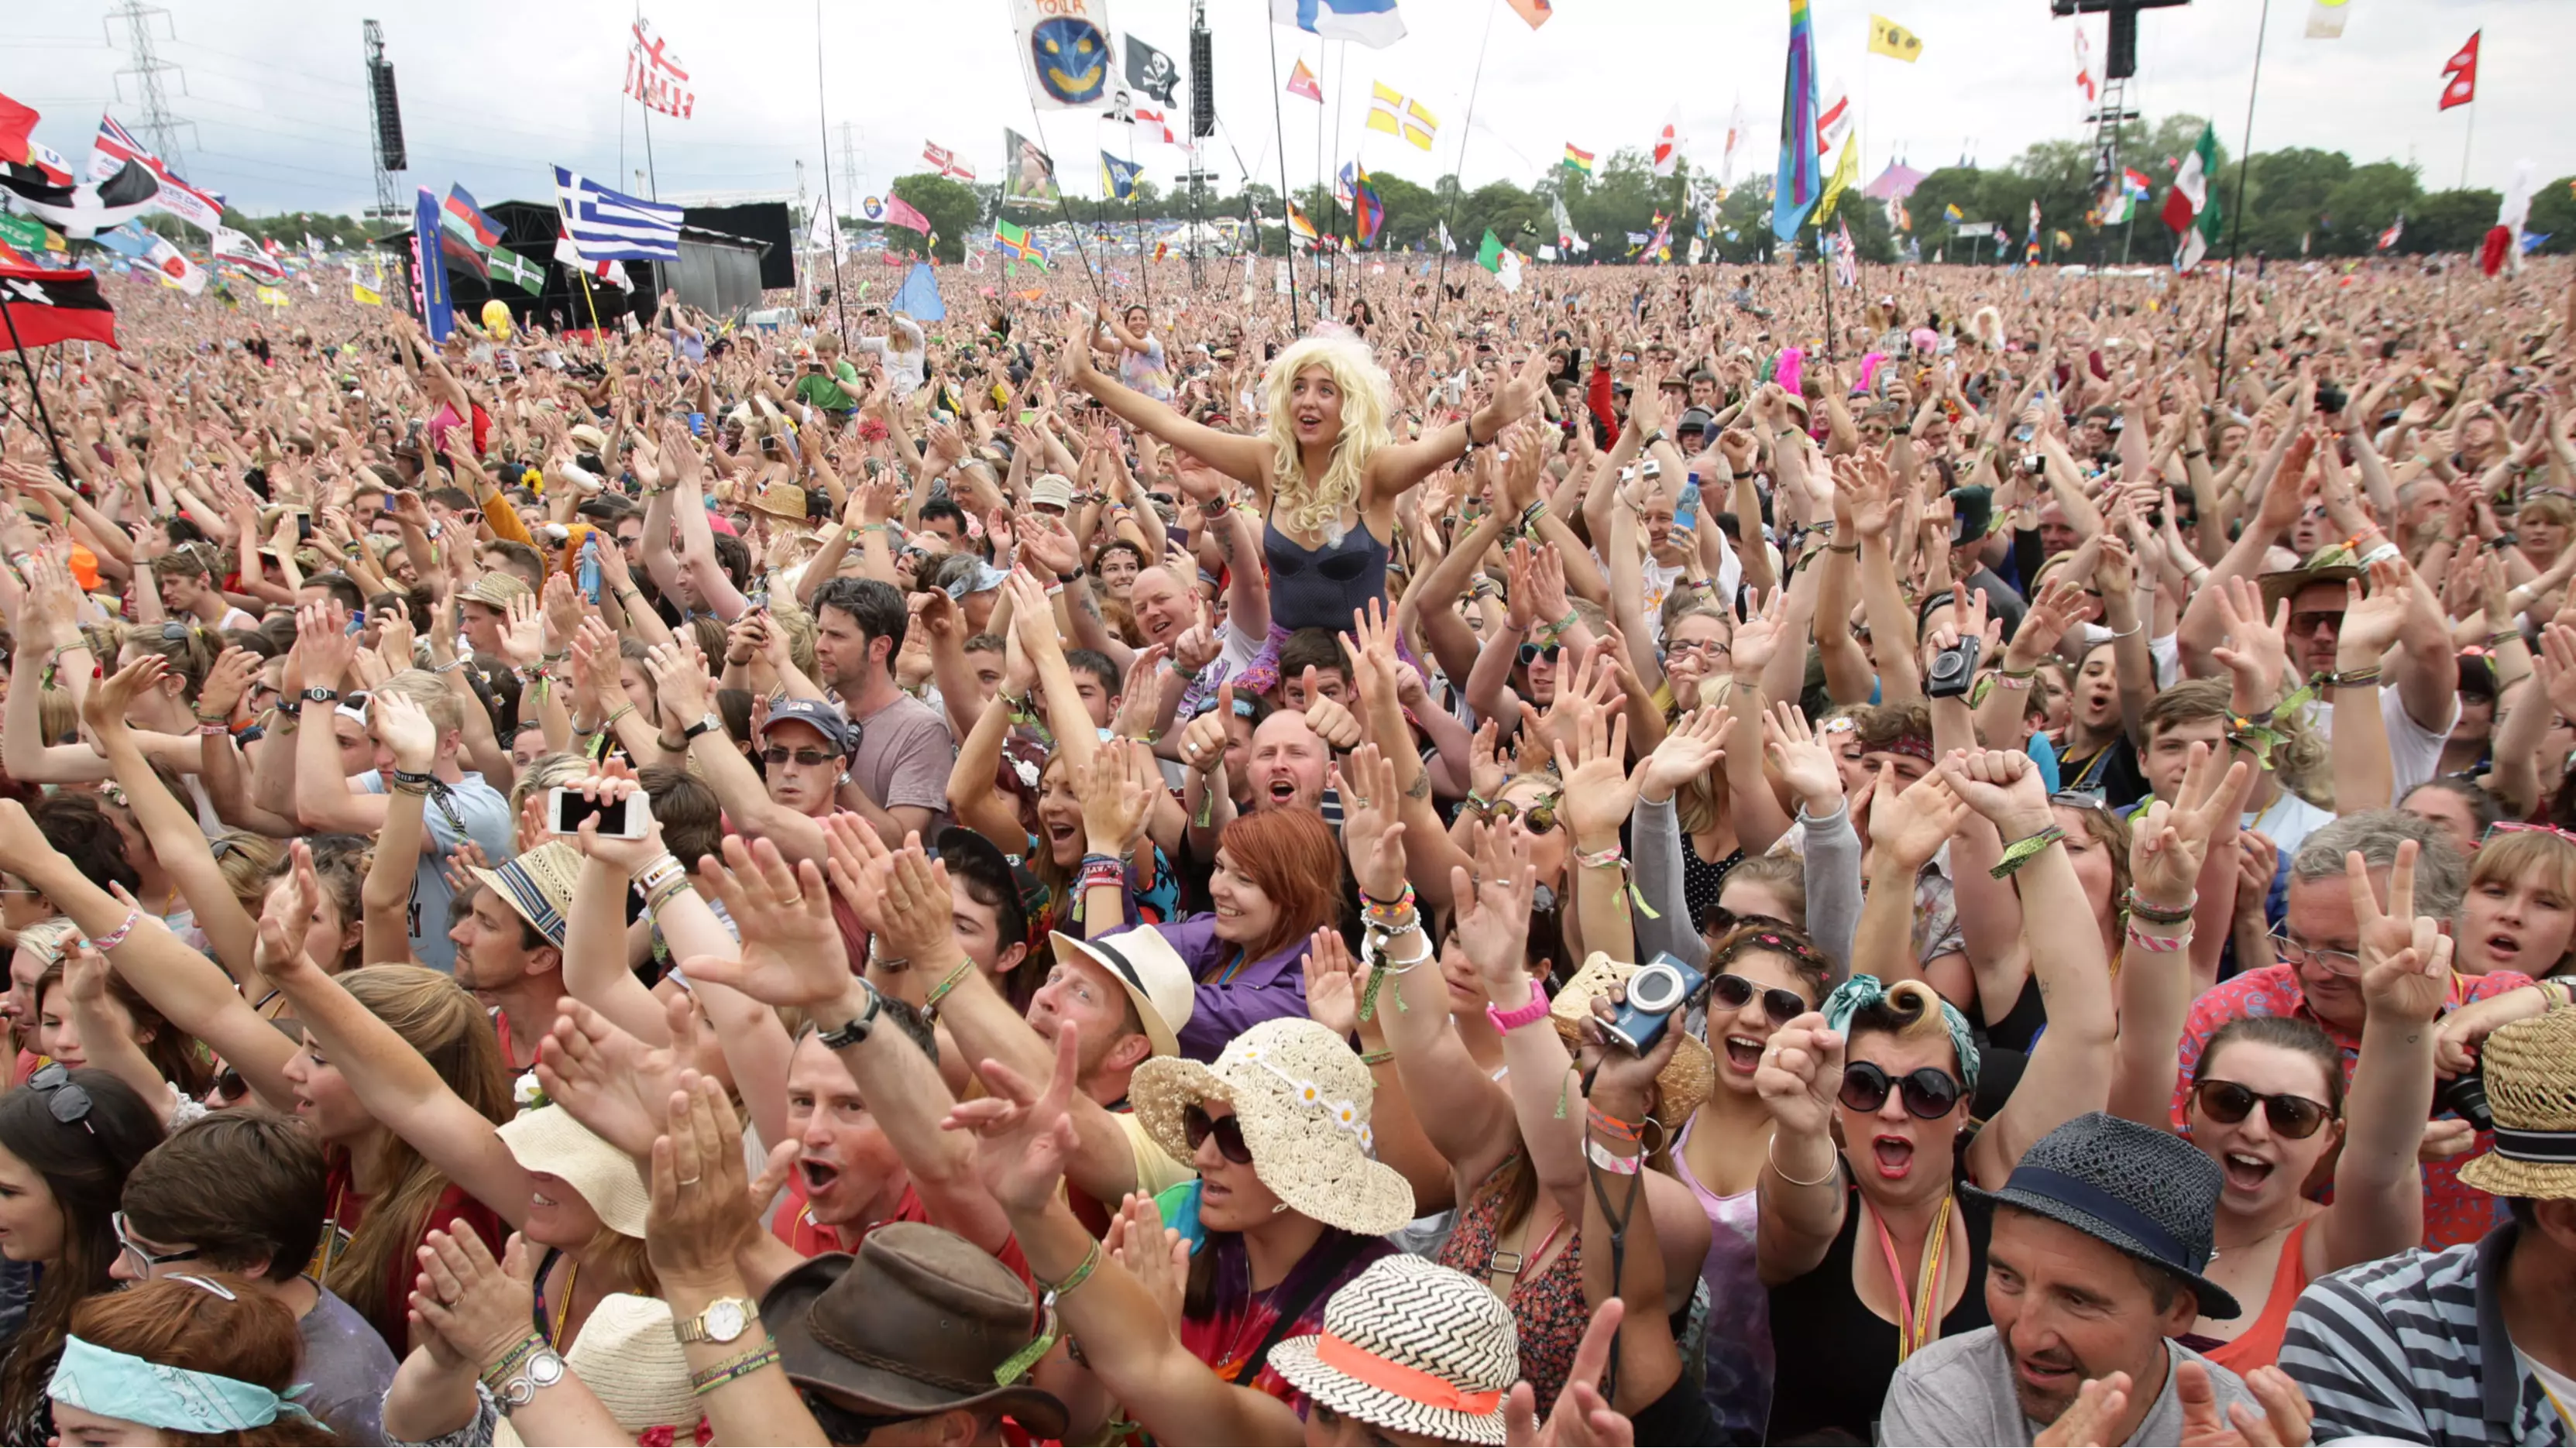 Glastonbury 2020 Ticket Sales Opens This Week: Registration, Coach Packages And Sign Up Details